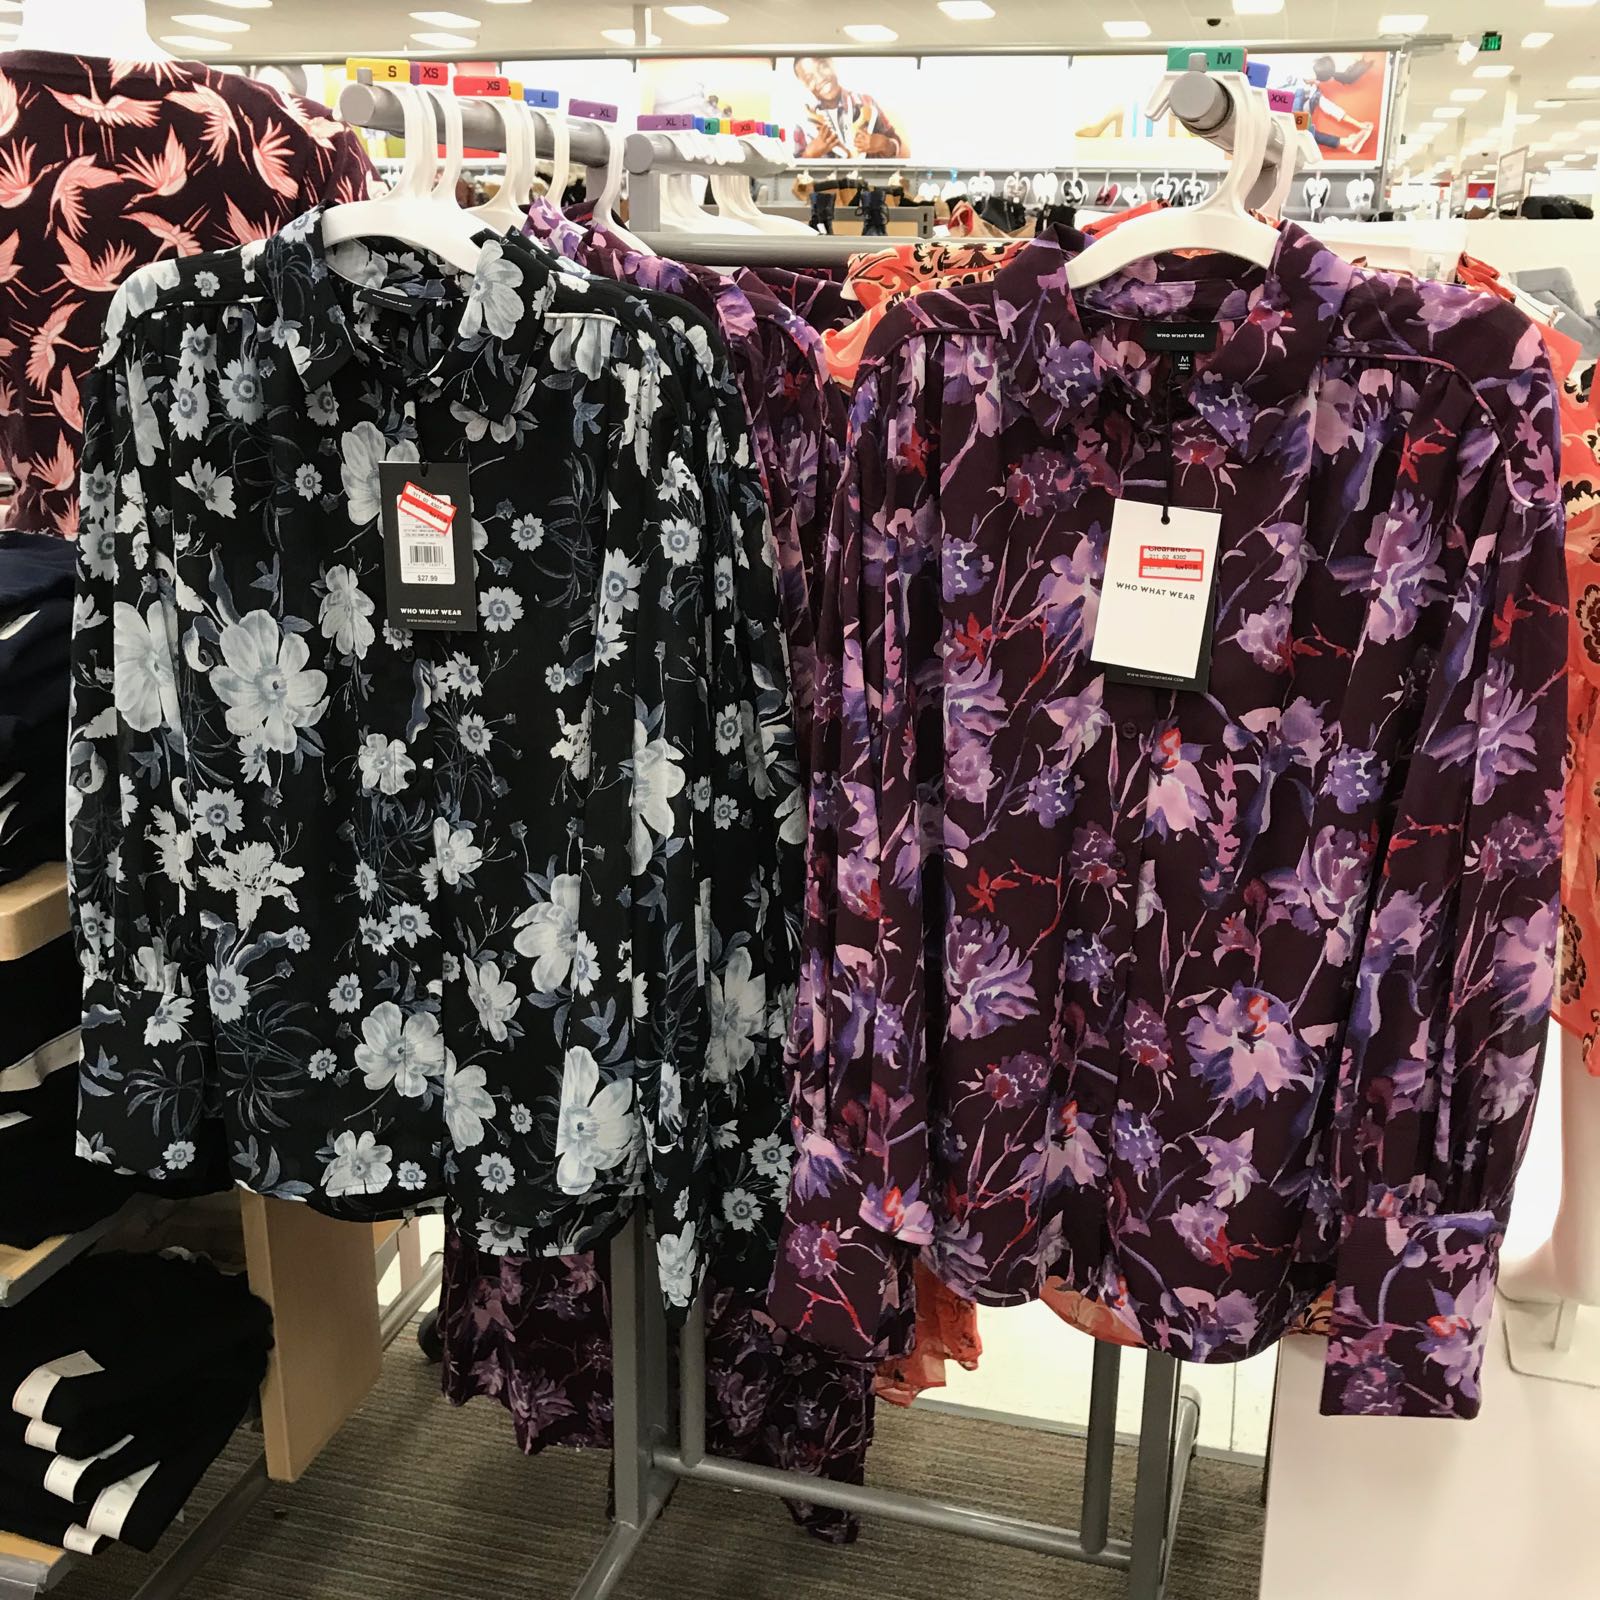 The cutest spring fashions at Target, from kimonos to babydoll dresses - and maternity styles too